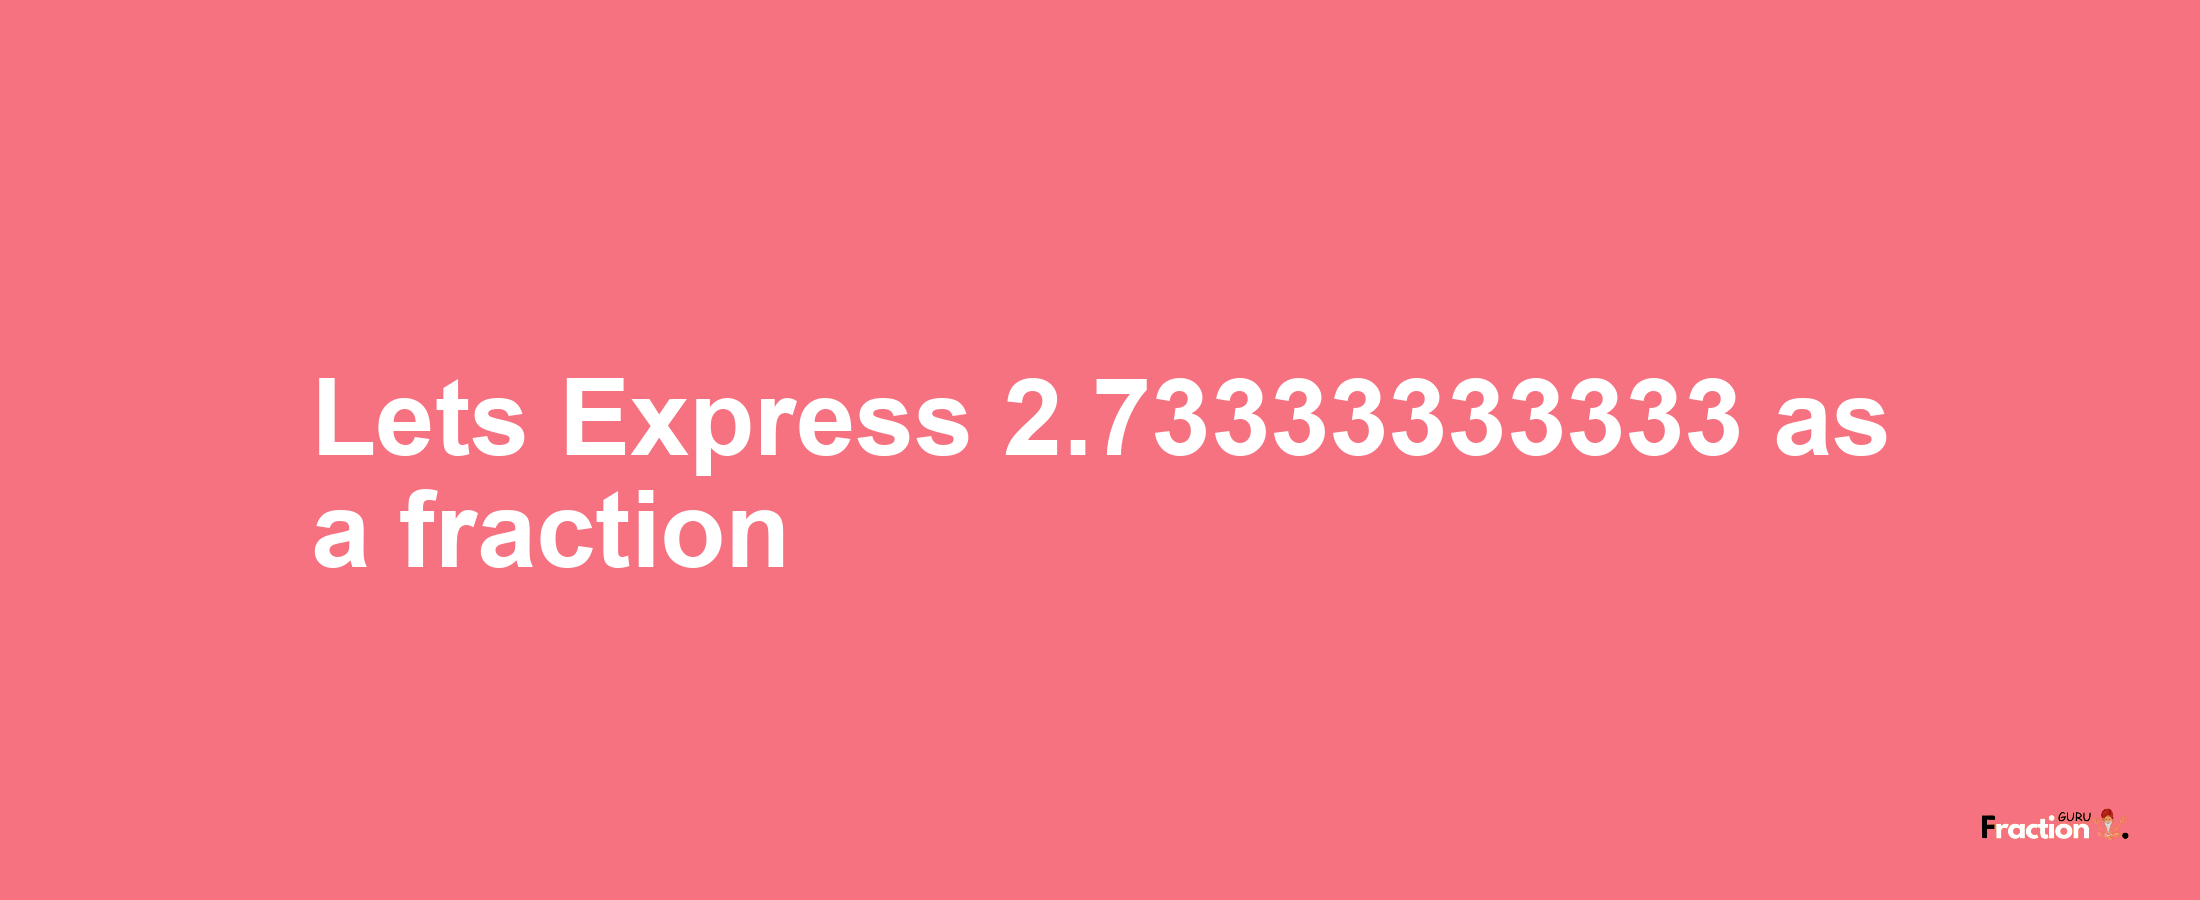 Lets Express 2.73333333333 as afraction